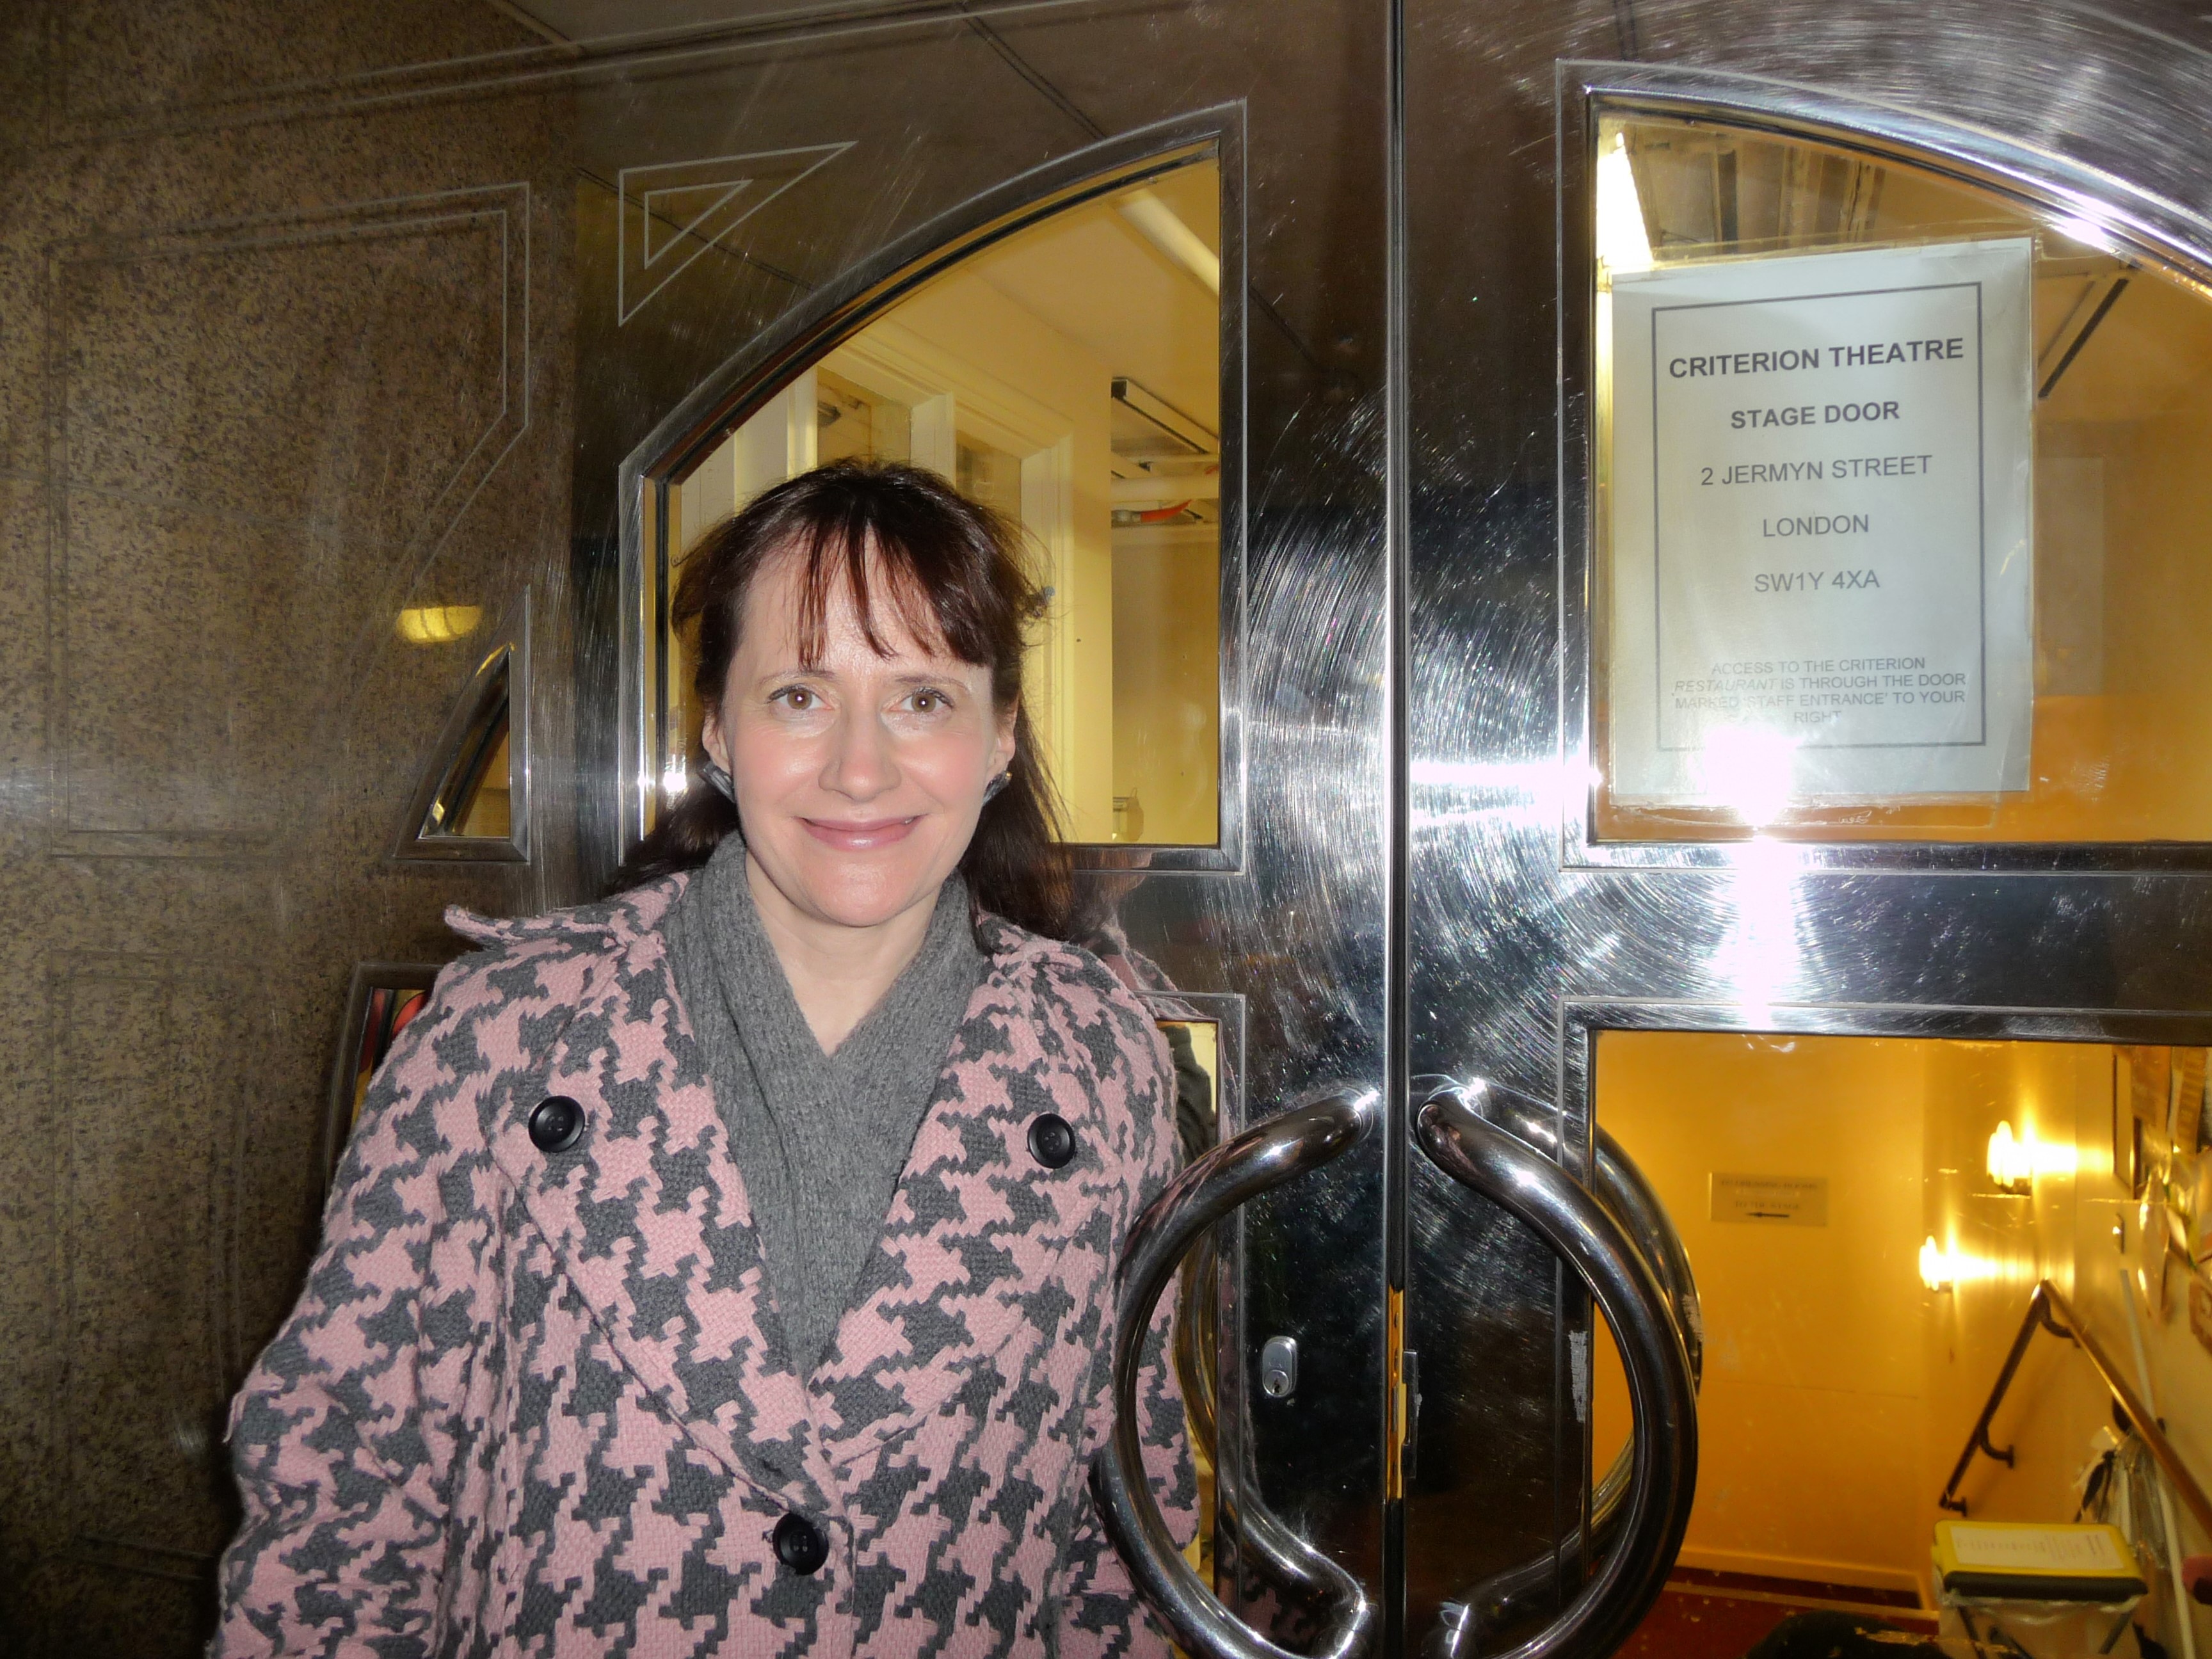 At the stage door of the Criterion Theatre West End after the industry matinee of 'Tortoise' by Naomi Westerman